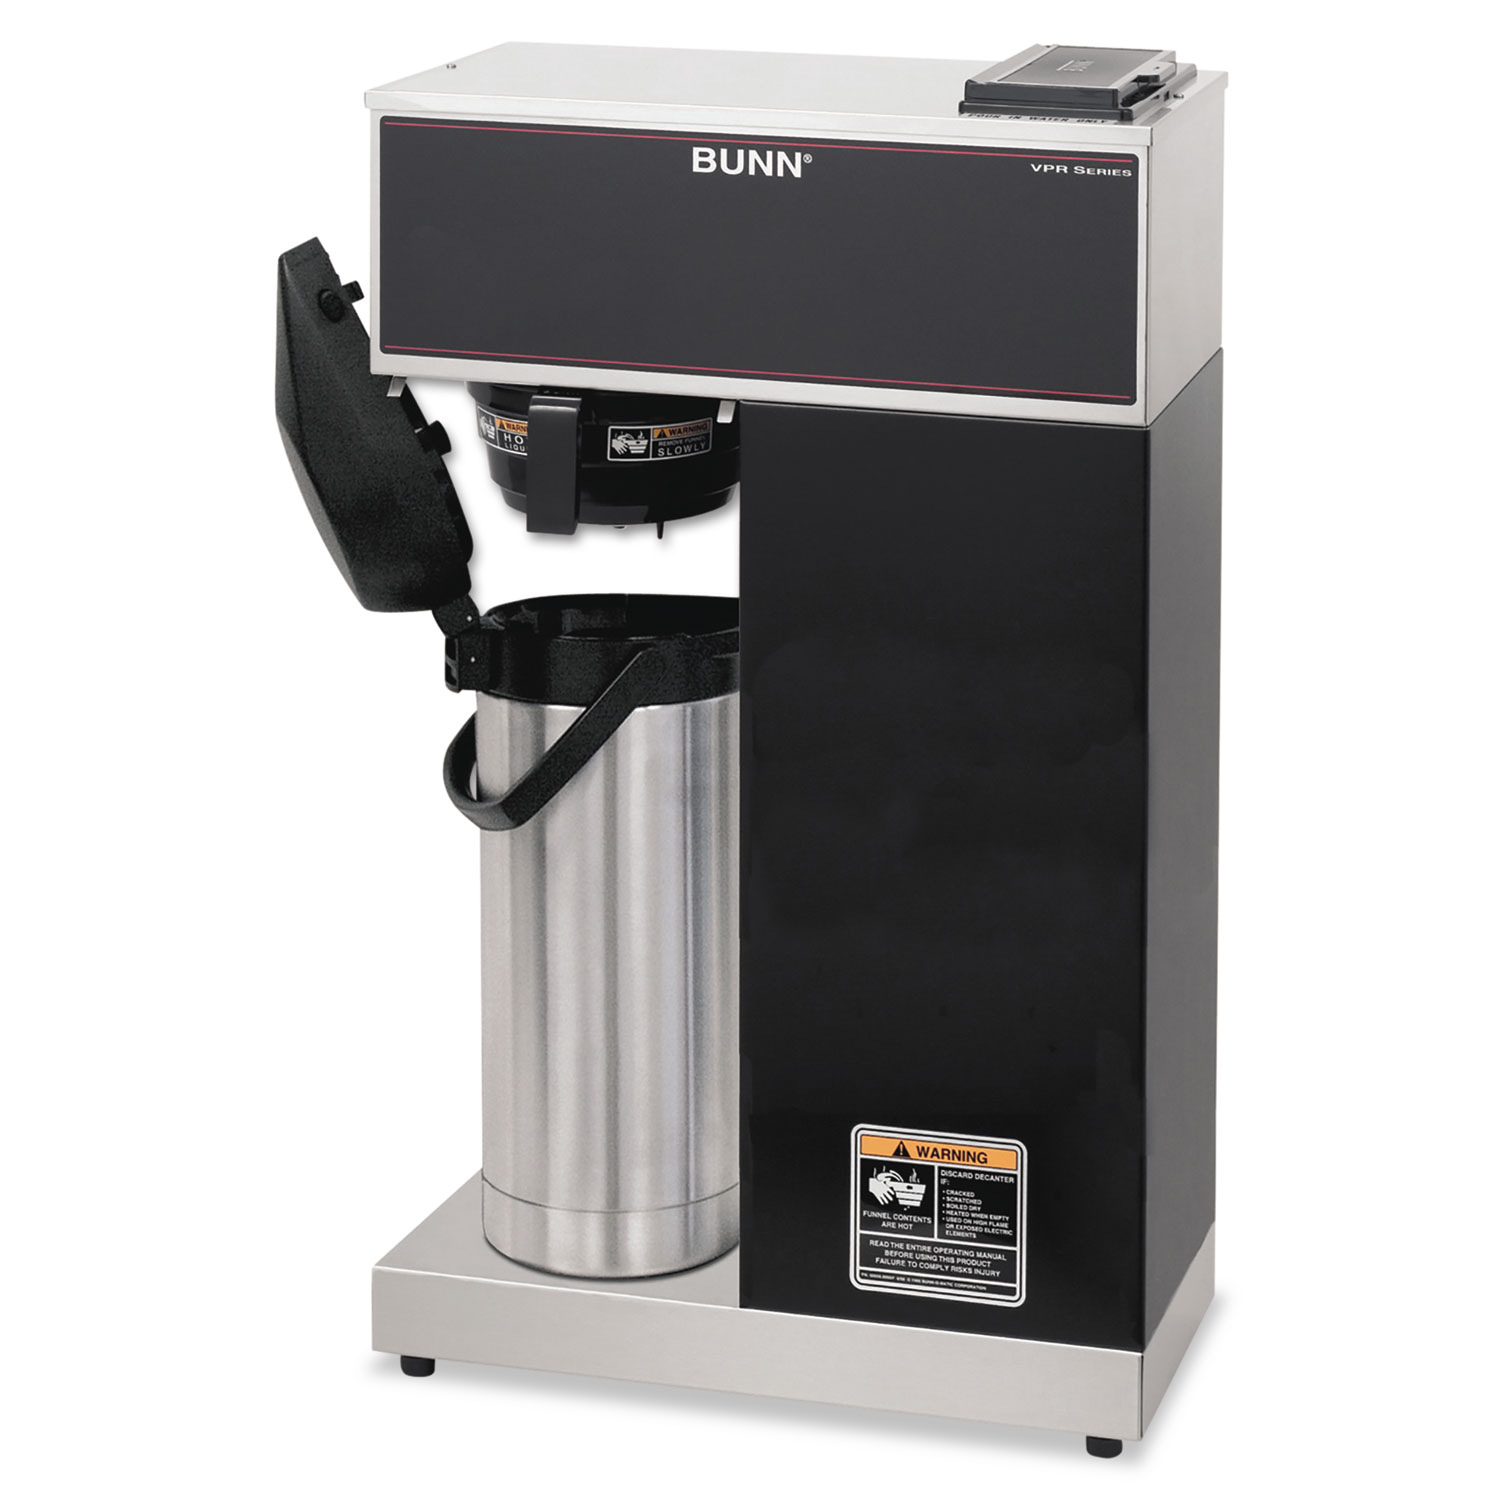  BUNN 33200.0014 VPR-APS Pourover Thermal Coffee Brewer with 2.2L Airpot, Stainless Steel, Black (BUNVPRAPS) 